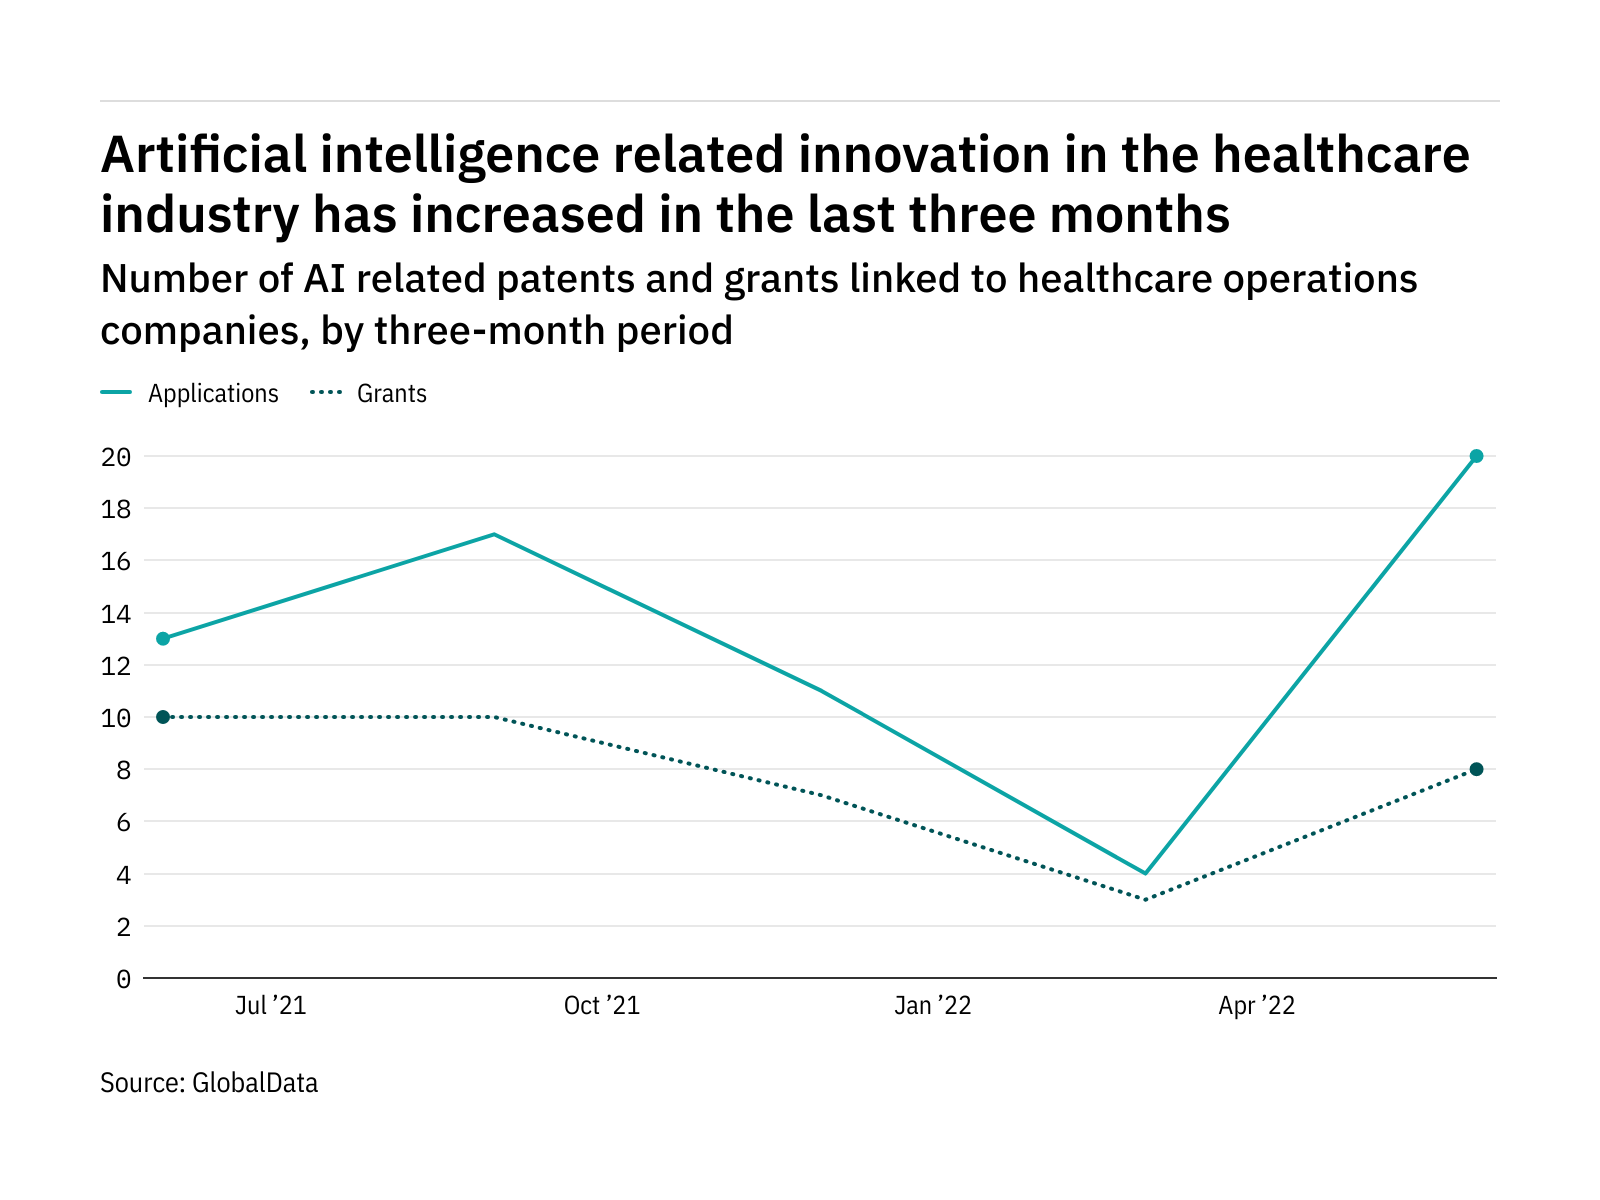 Healthcare industry companies are increasingly innovating in artificial intelligence